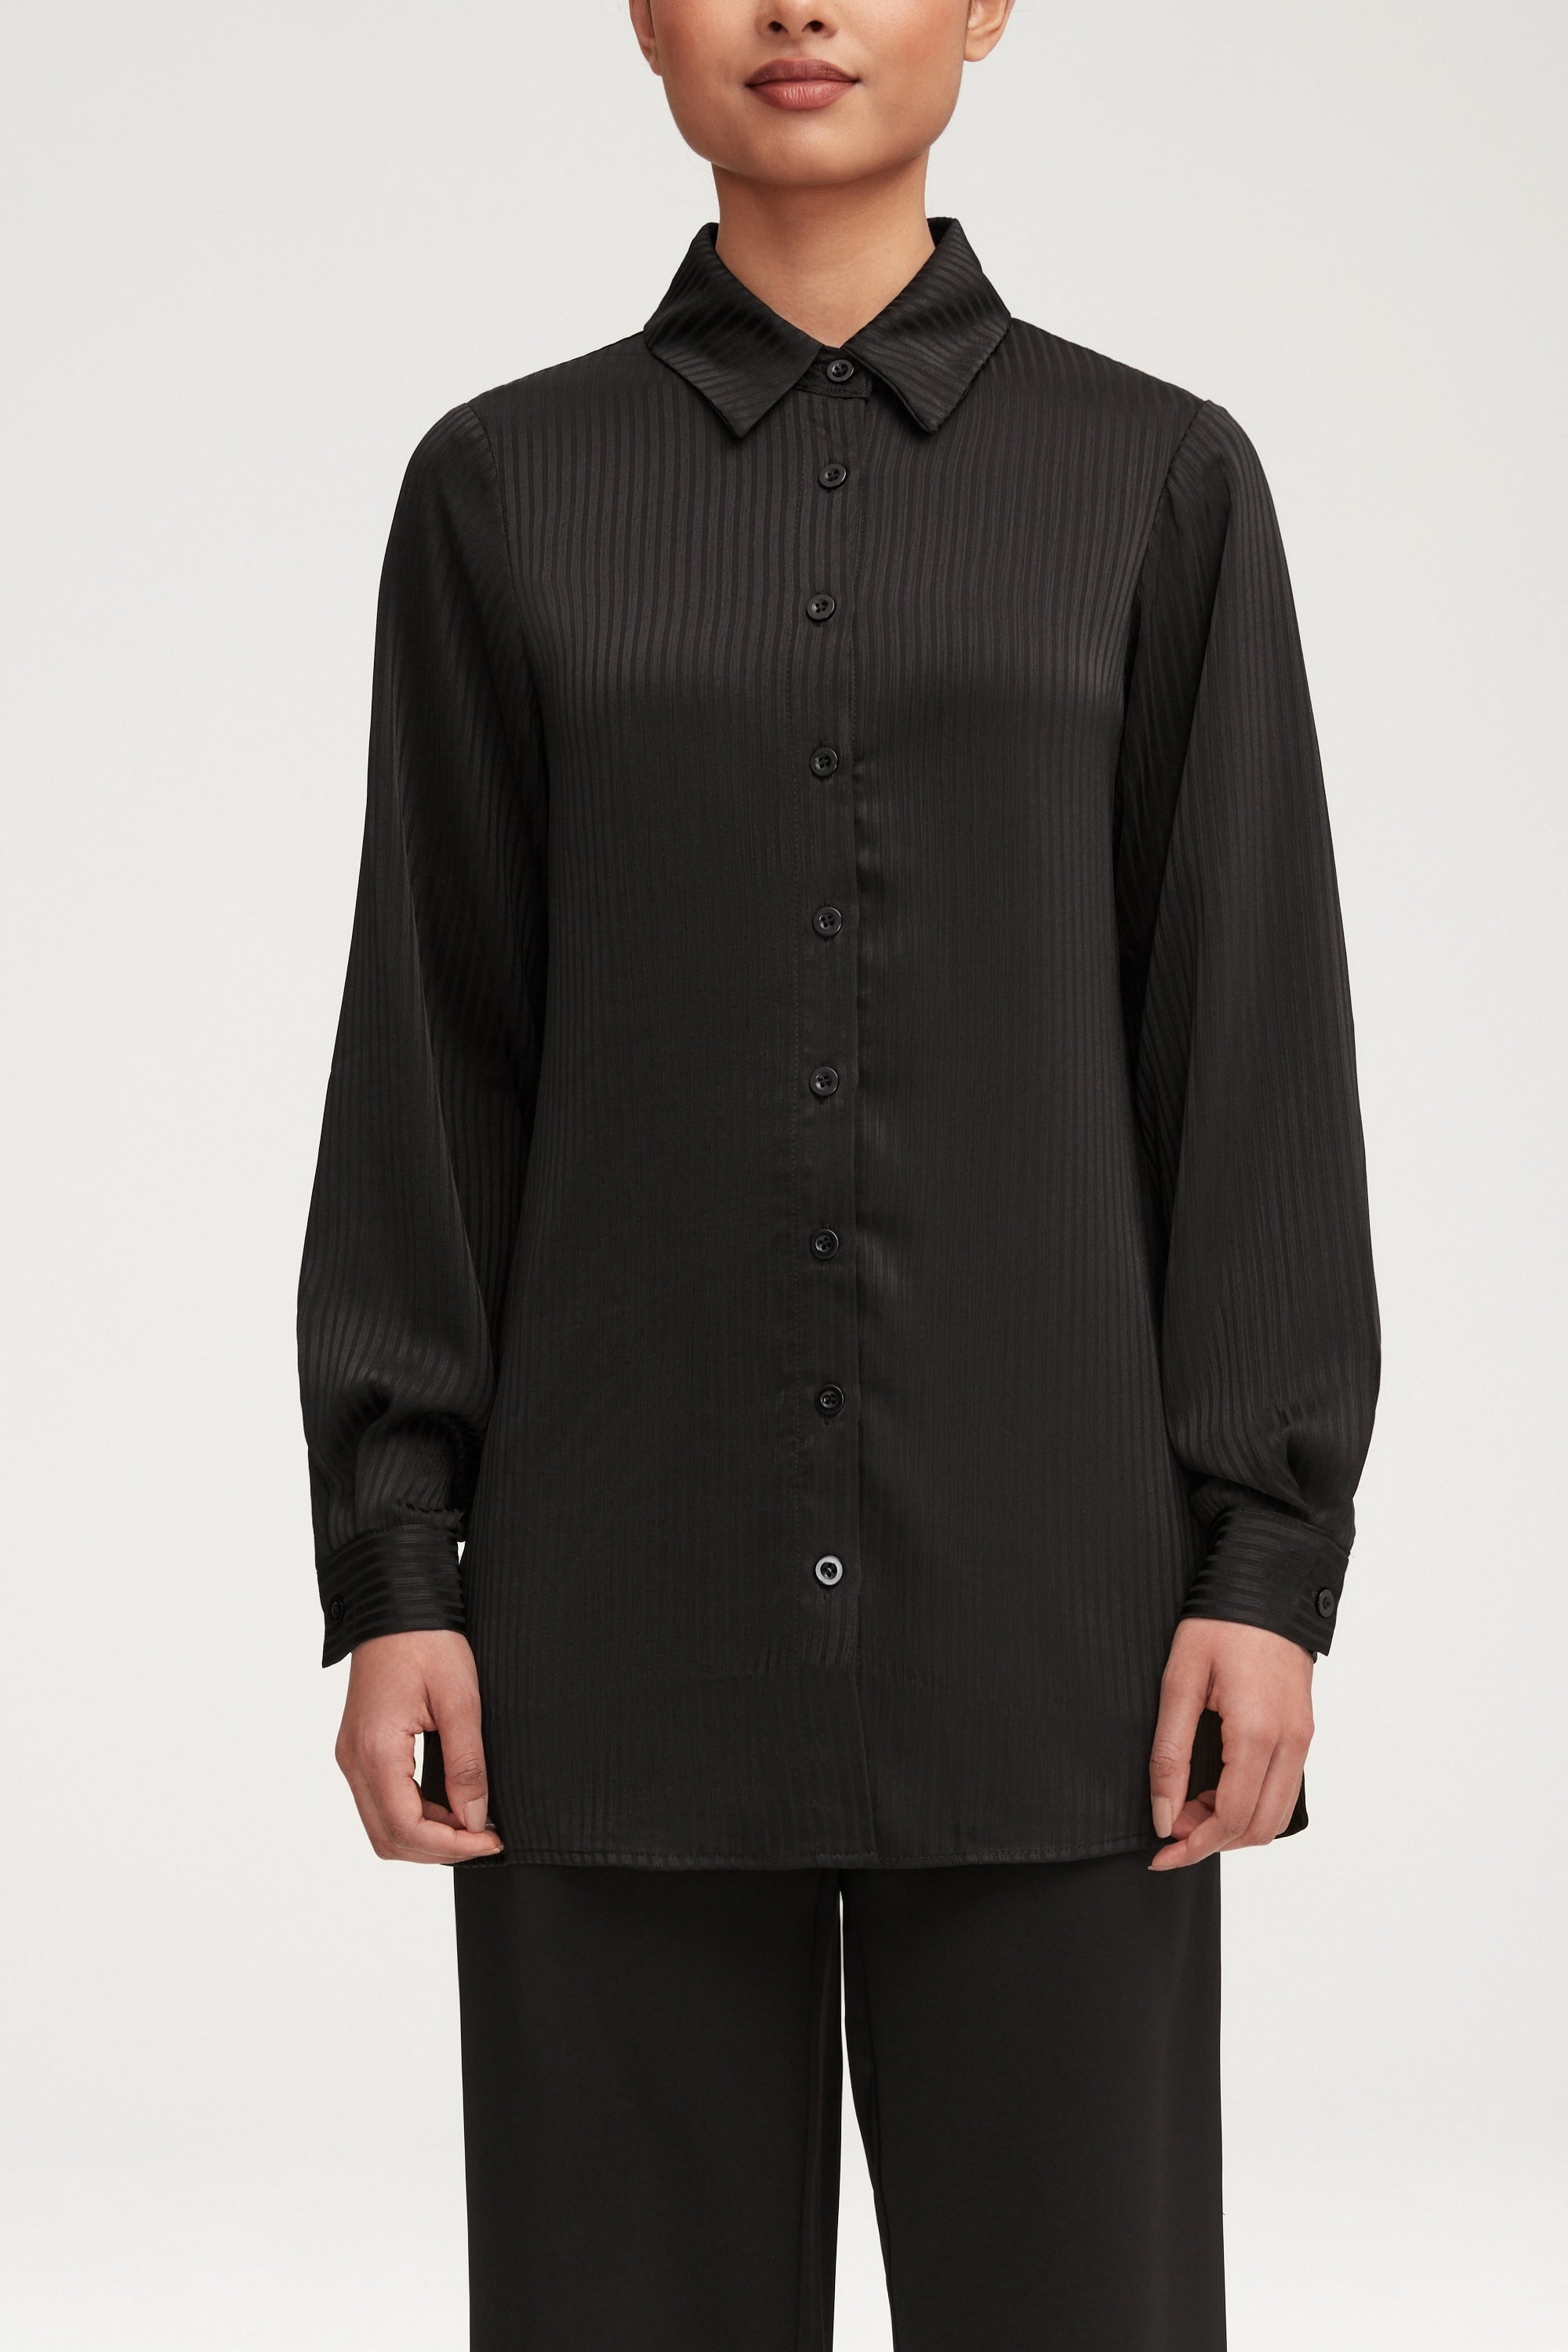 Jaserah Button Down Top - Black Clothing epschoolboard 